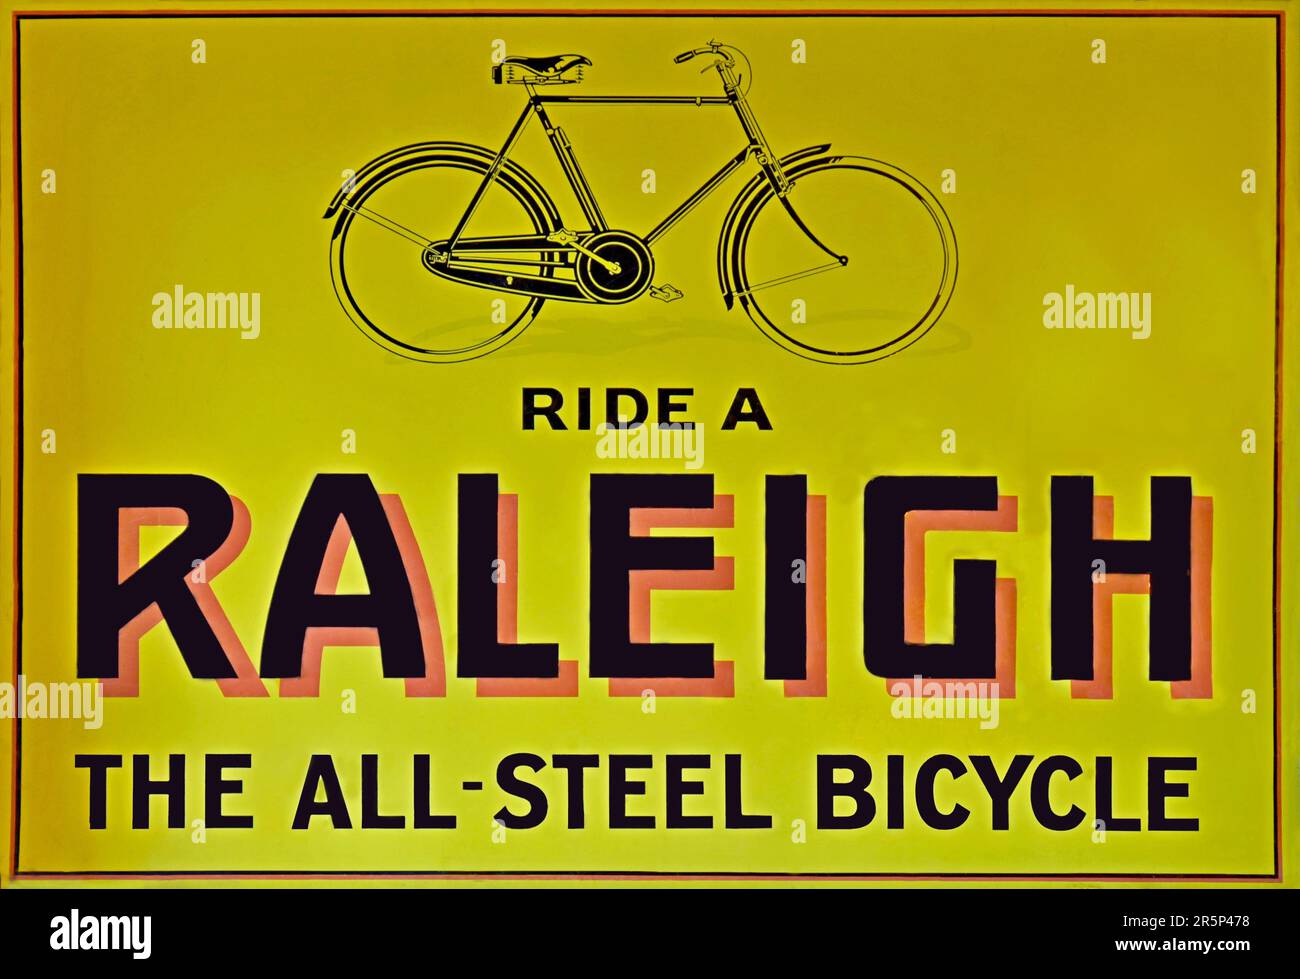 A vintage enamel advert sign for Raleigh all steel bicycles Stock Photo